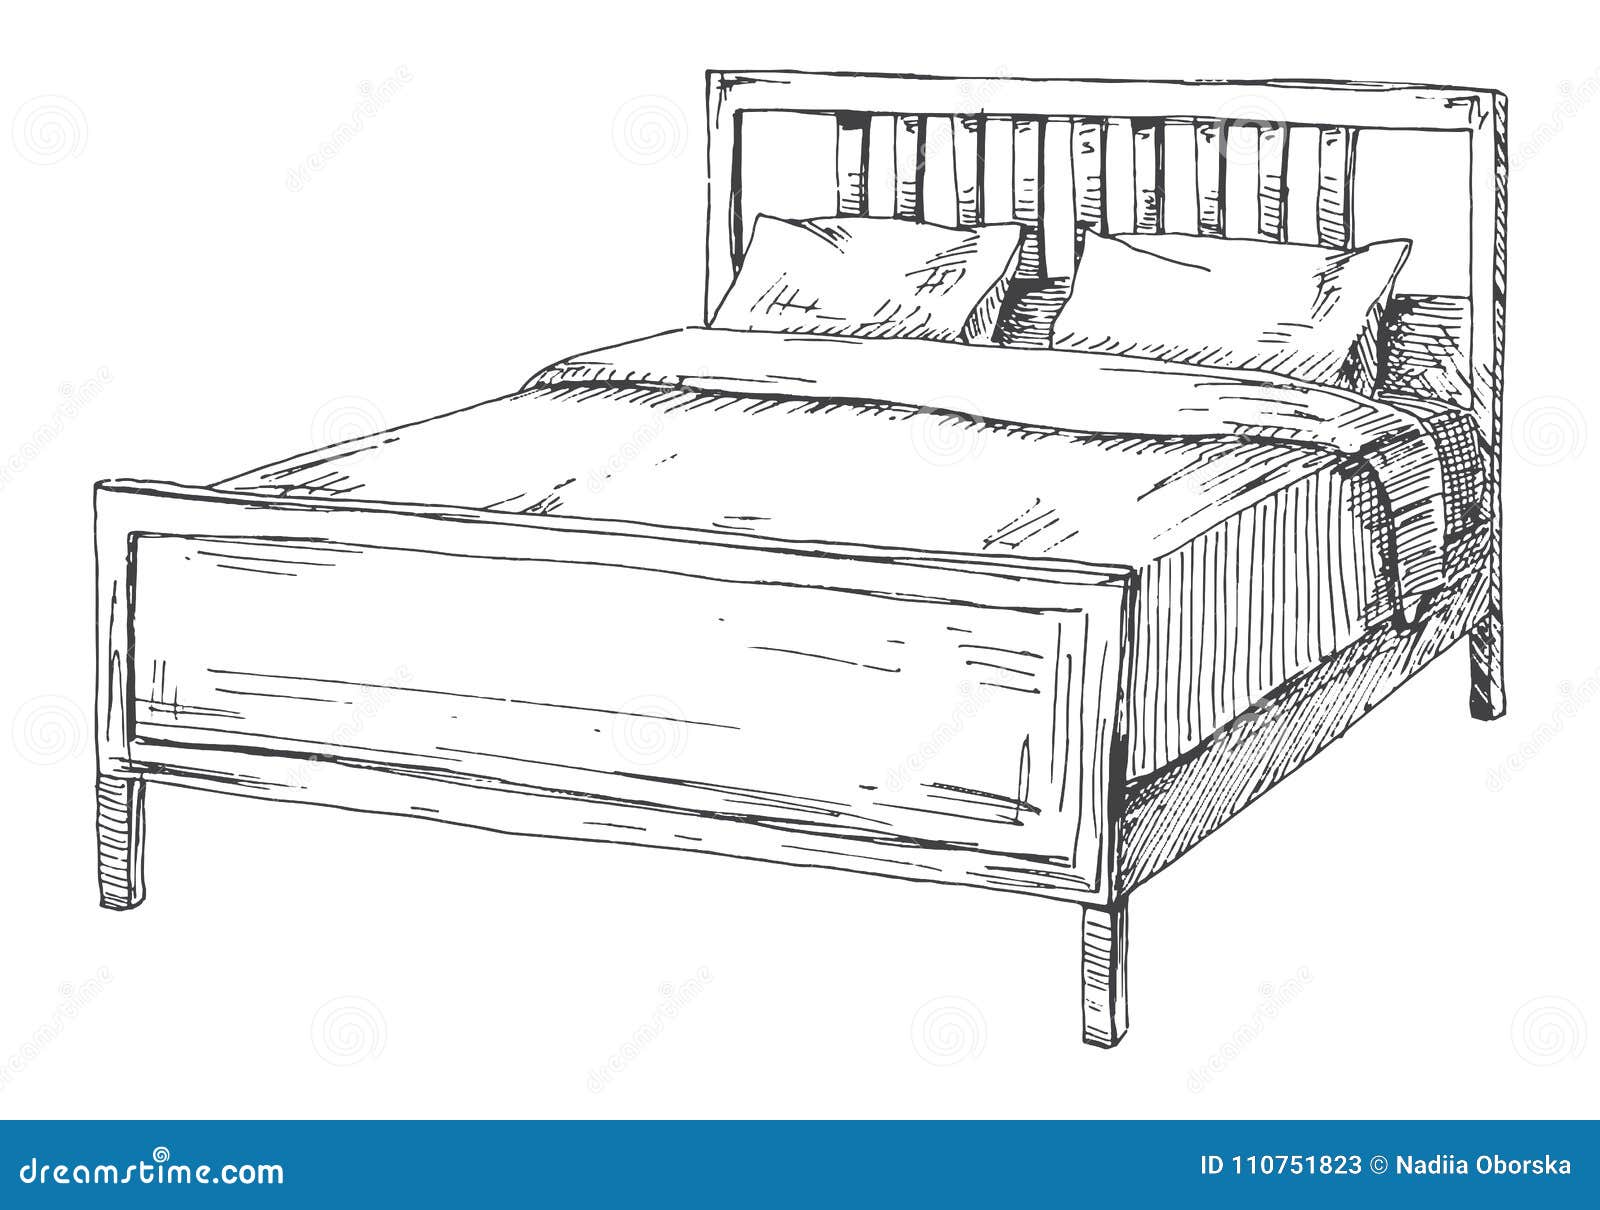 Double Bed Isolated on White Background. Vector Illustration in Sketch